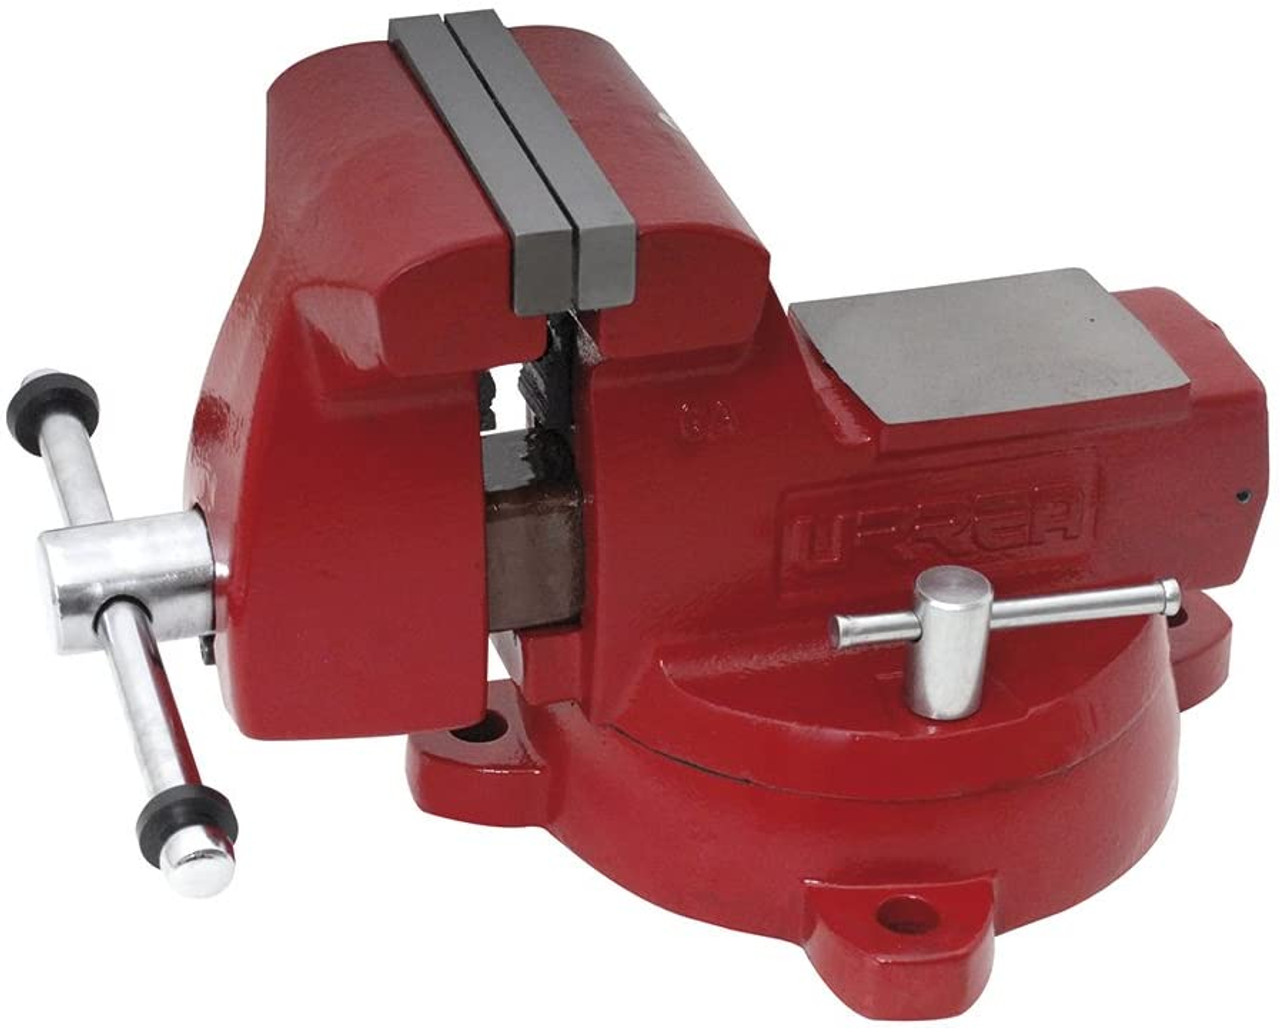 URREA 4 inch heavy duty Workbench Vise with Pipe Jaws